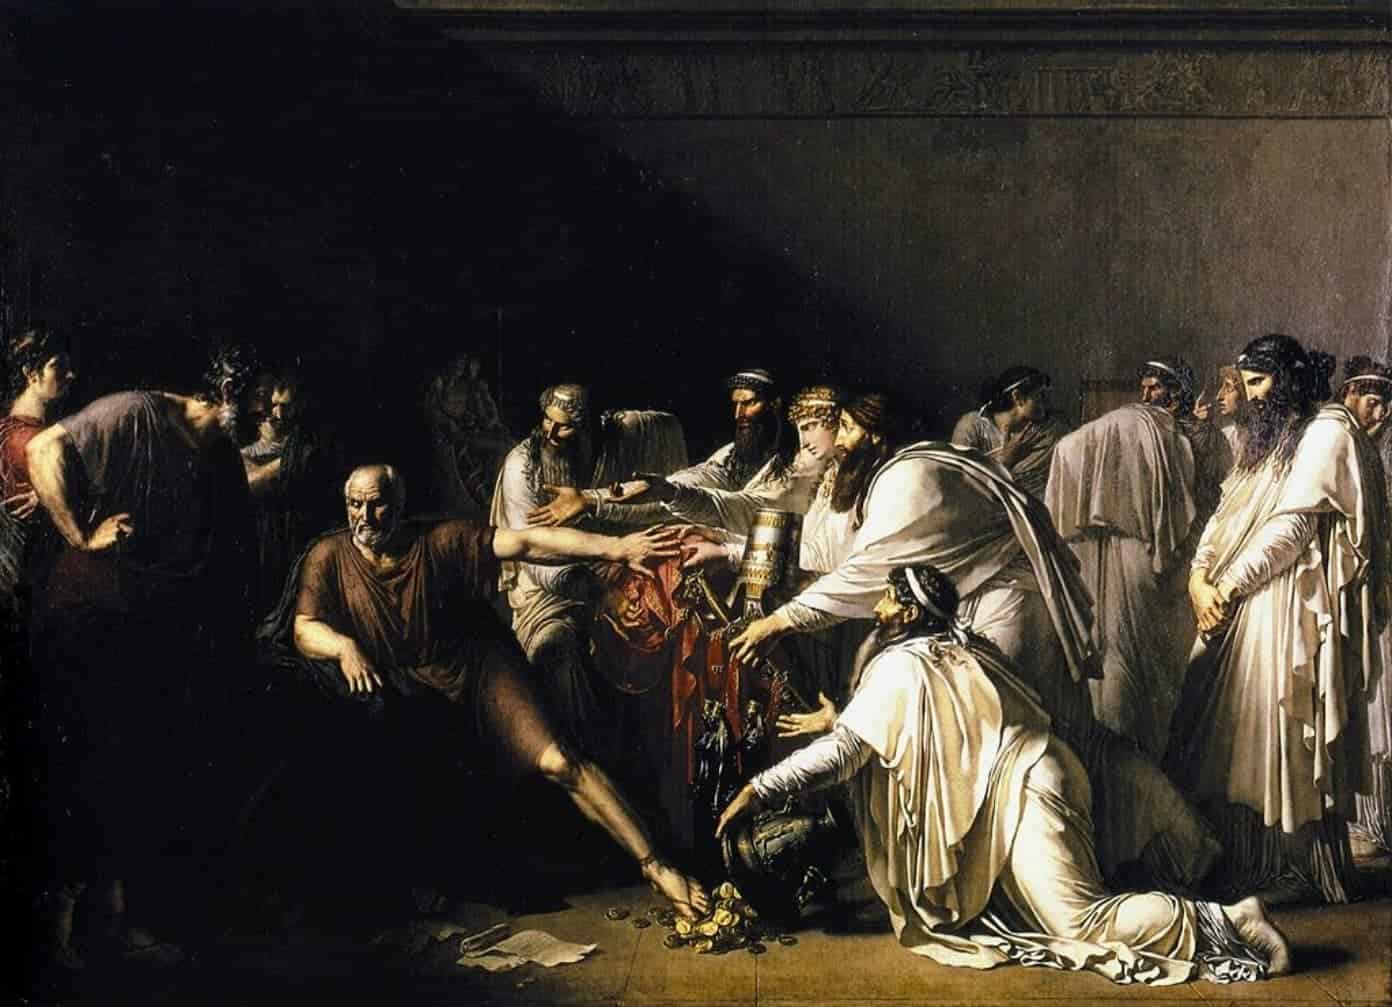 Illustration of the story of Hippocrates refusing the presents of the Achaemenid Emperor Artaxerxes. Painting by Girodet, 1792. Credit: Public Domain